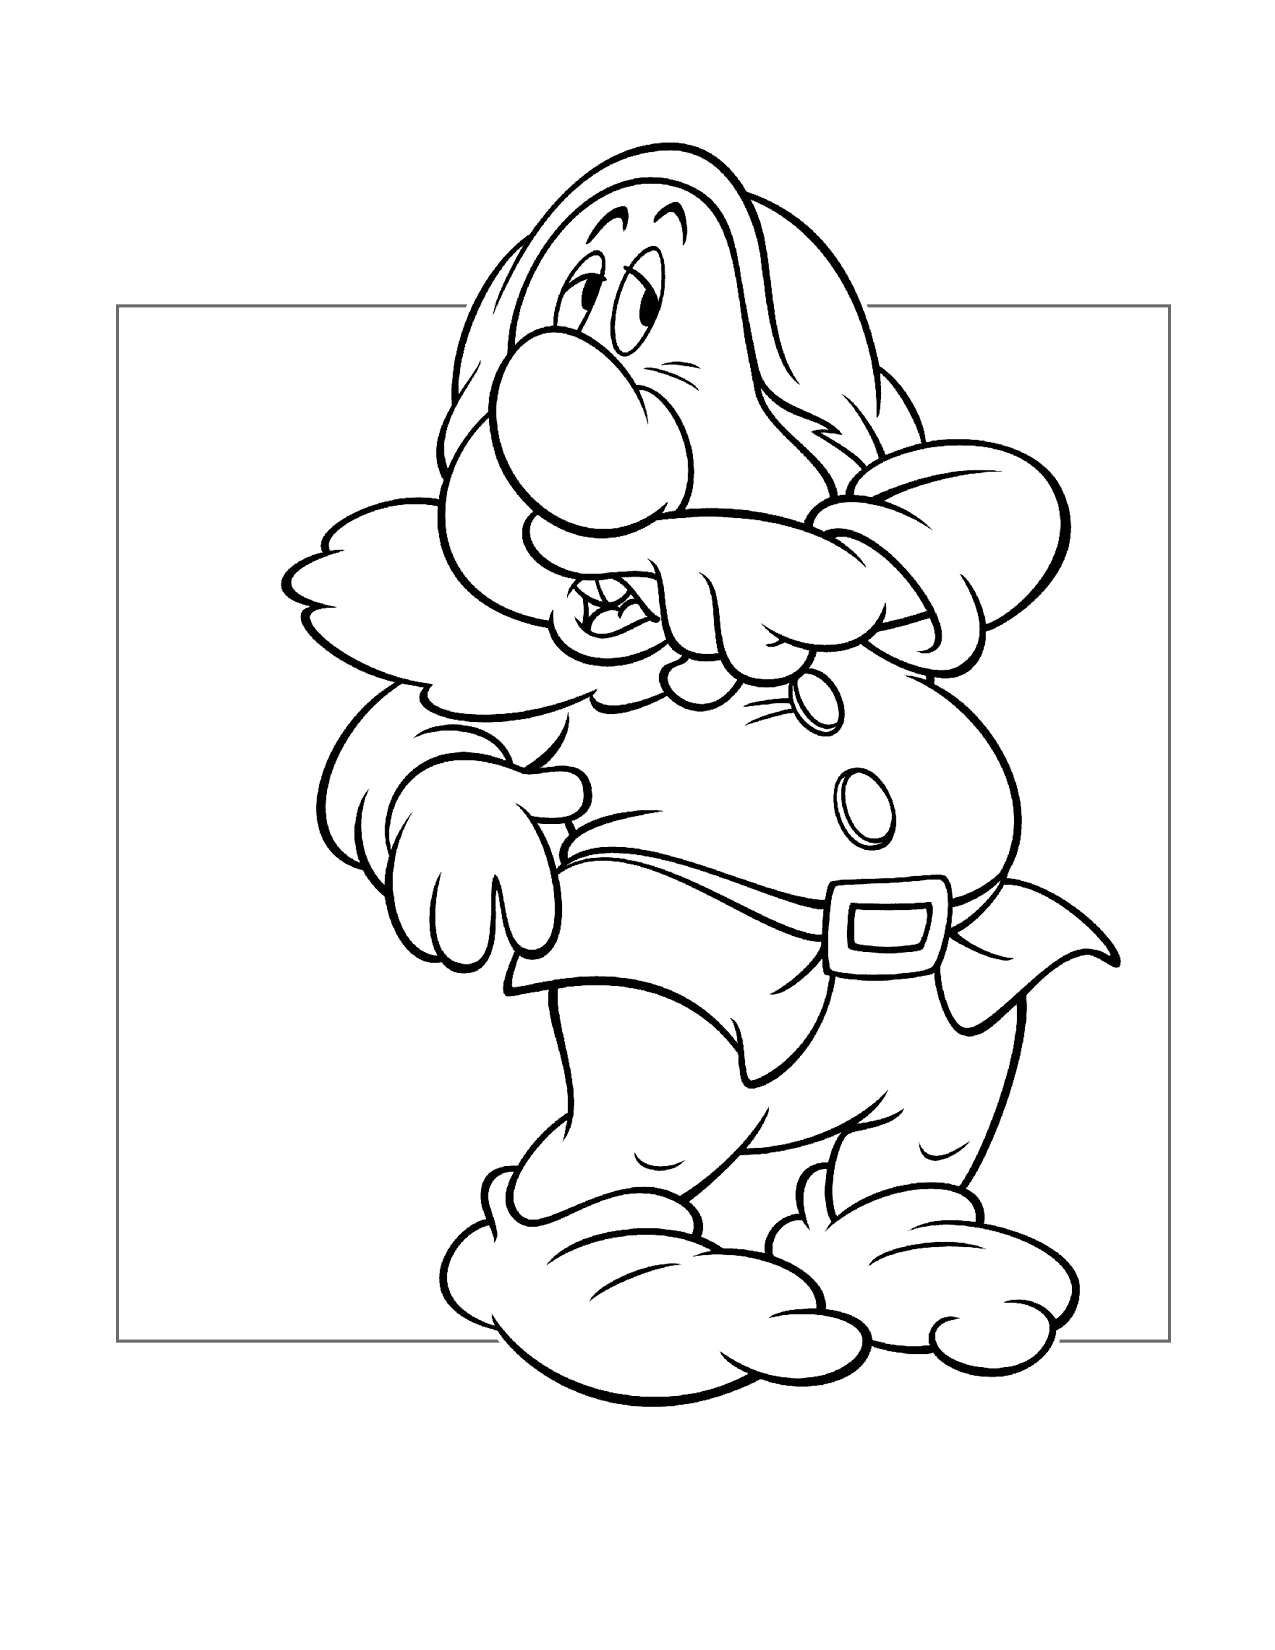 Sneezy Dwarf Coloring Page